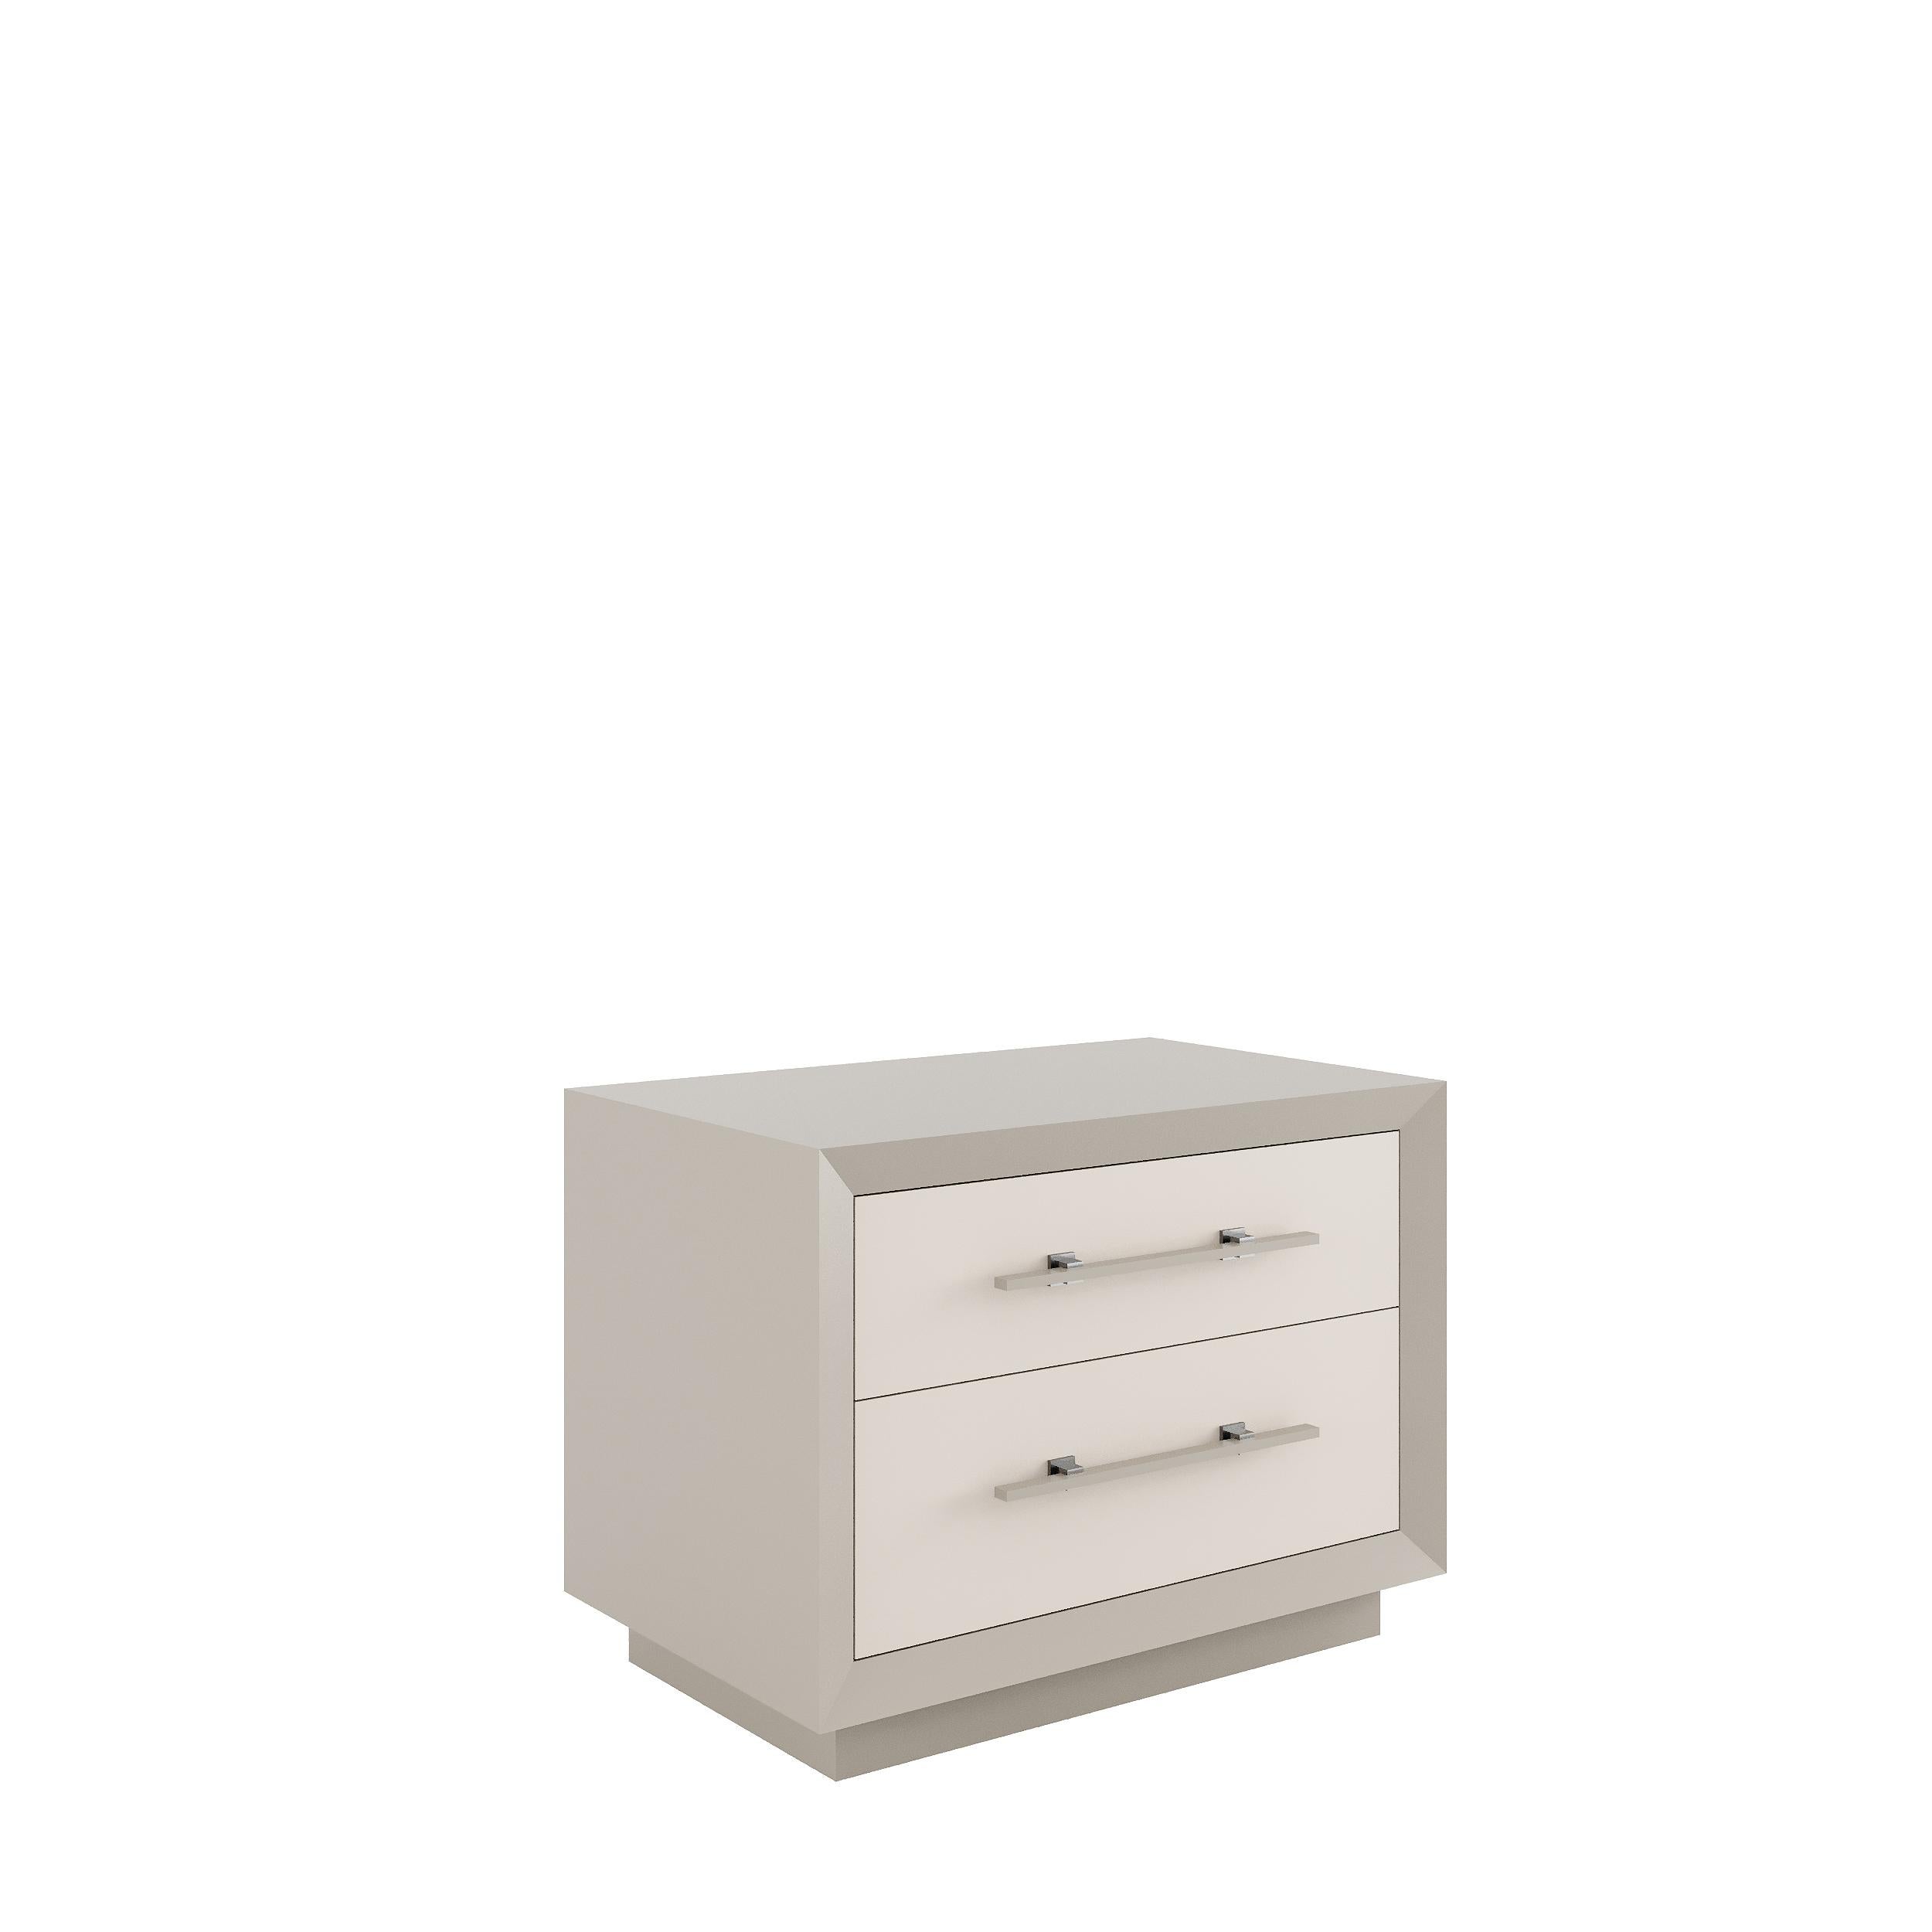 Portuguese MAGNA large nightstand - wooden base For Sale